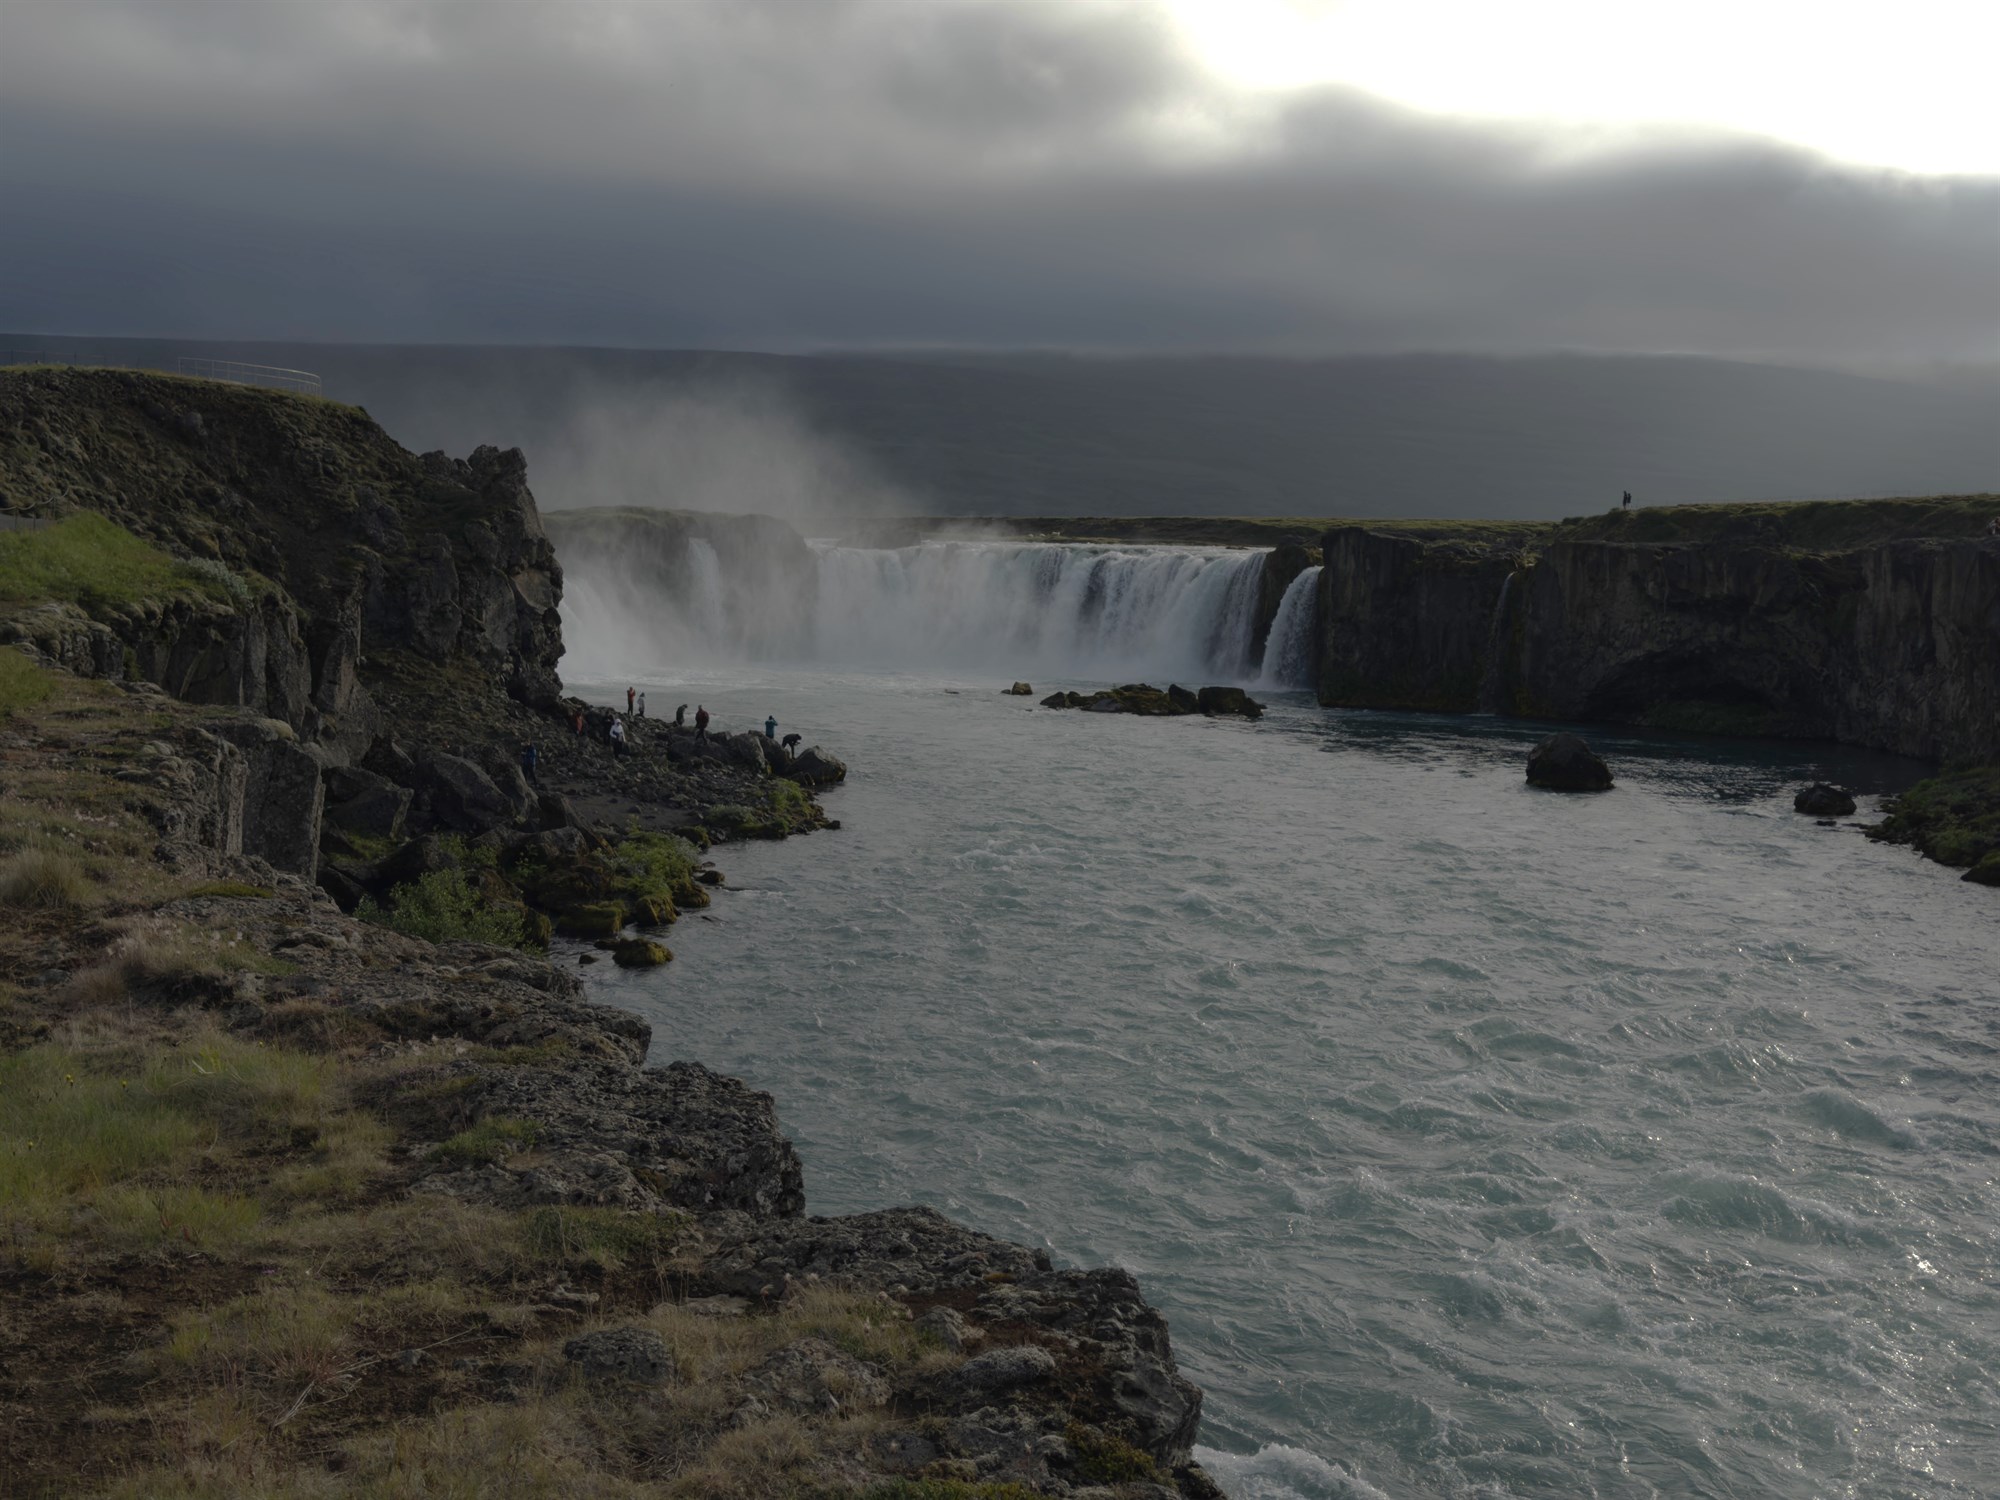  Goðafoss Waterfall on a cloudy day